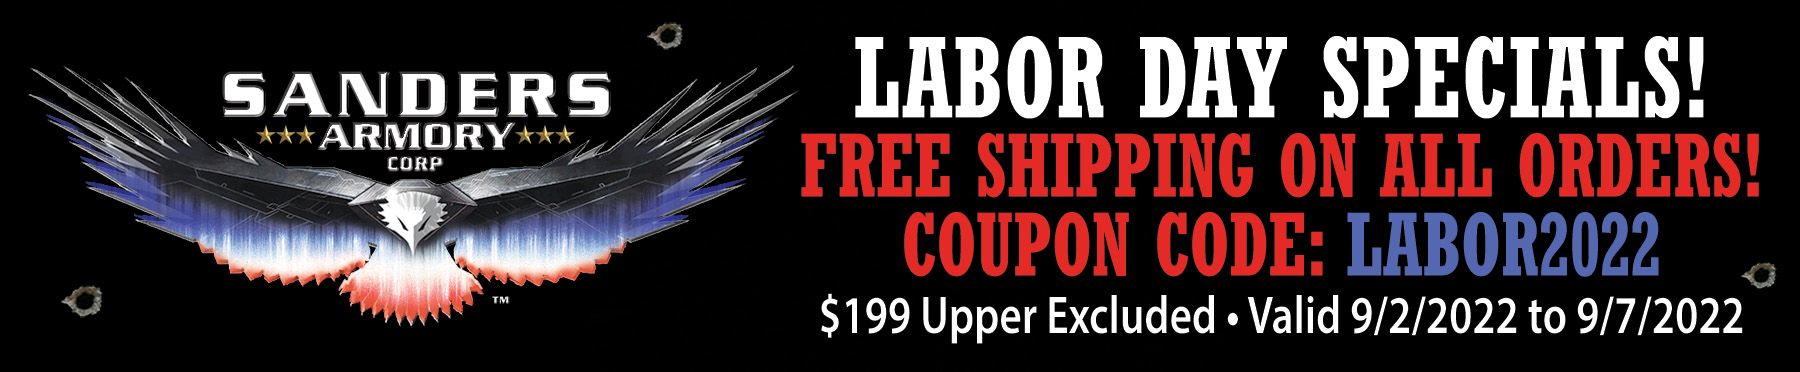 Sanders Day Free Shipping Labor Day Coupon Code: LABOR2022